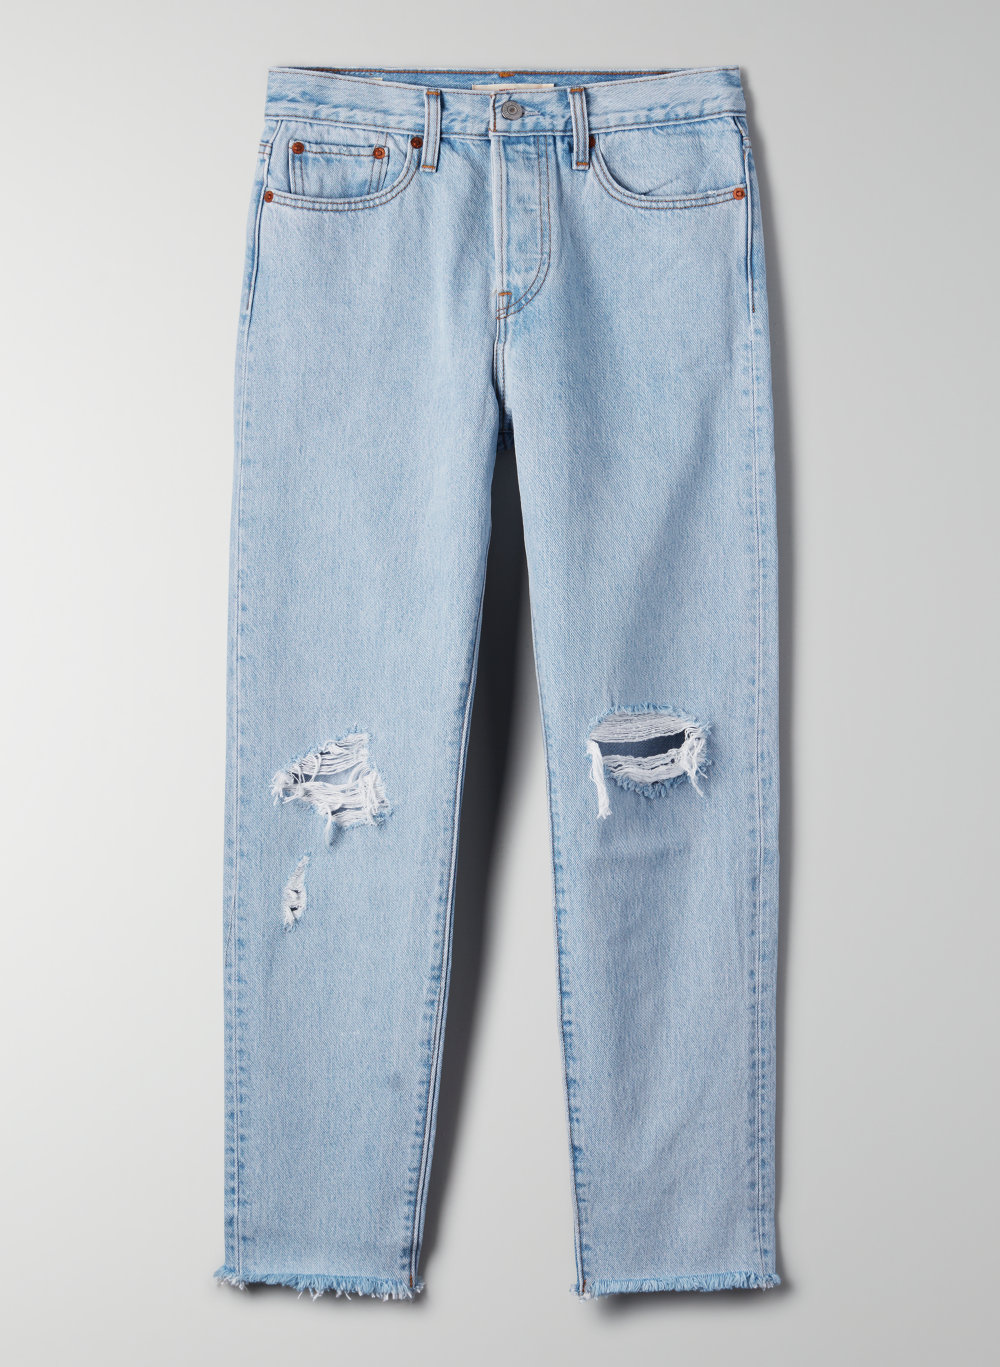 wedgie fit light wash high rise jeans levi's